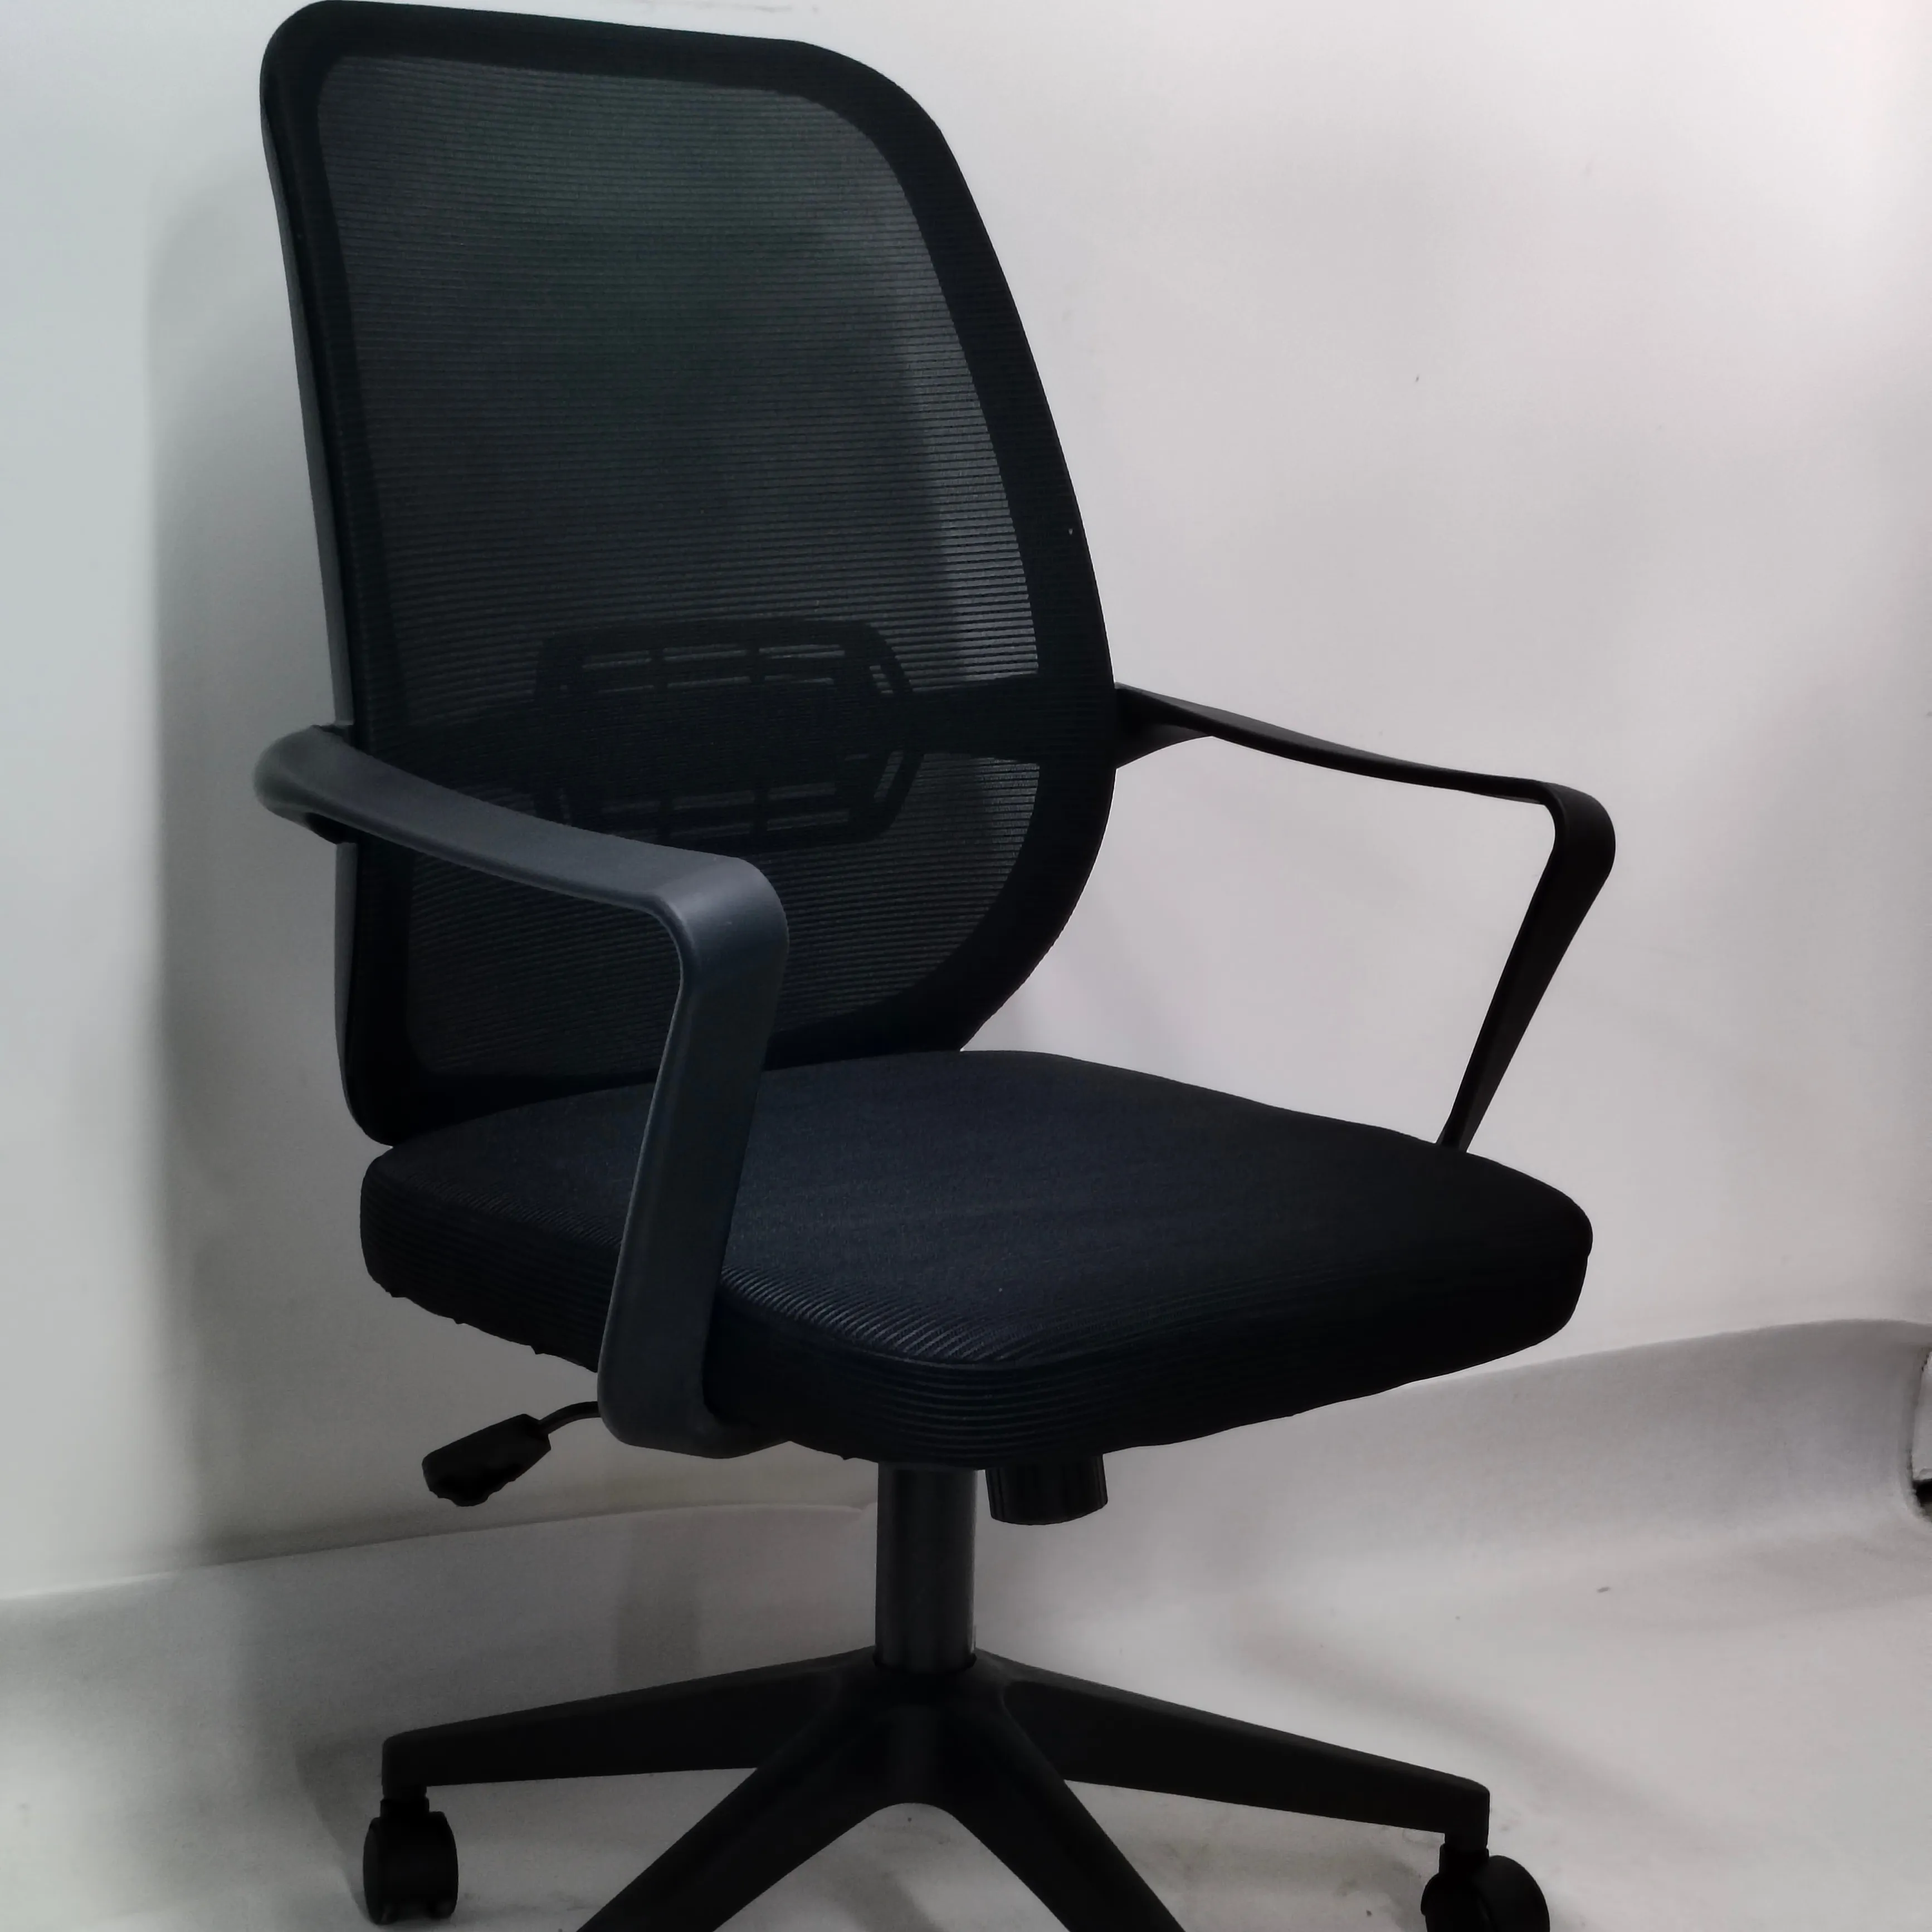 Luxury Ceo Executive Office Chair With Adjustable Rocking Steering Wheel Full Black Leather Computer Rocker Gaming Silla Oficina